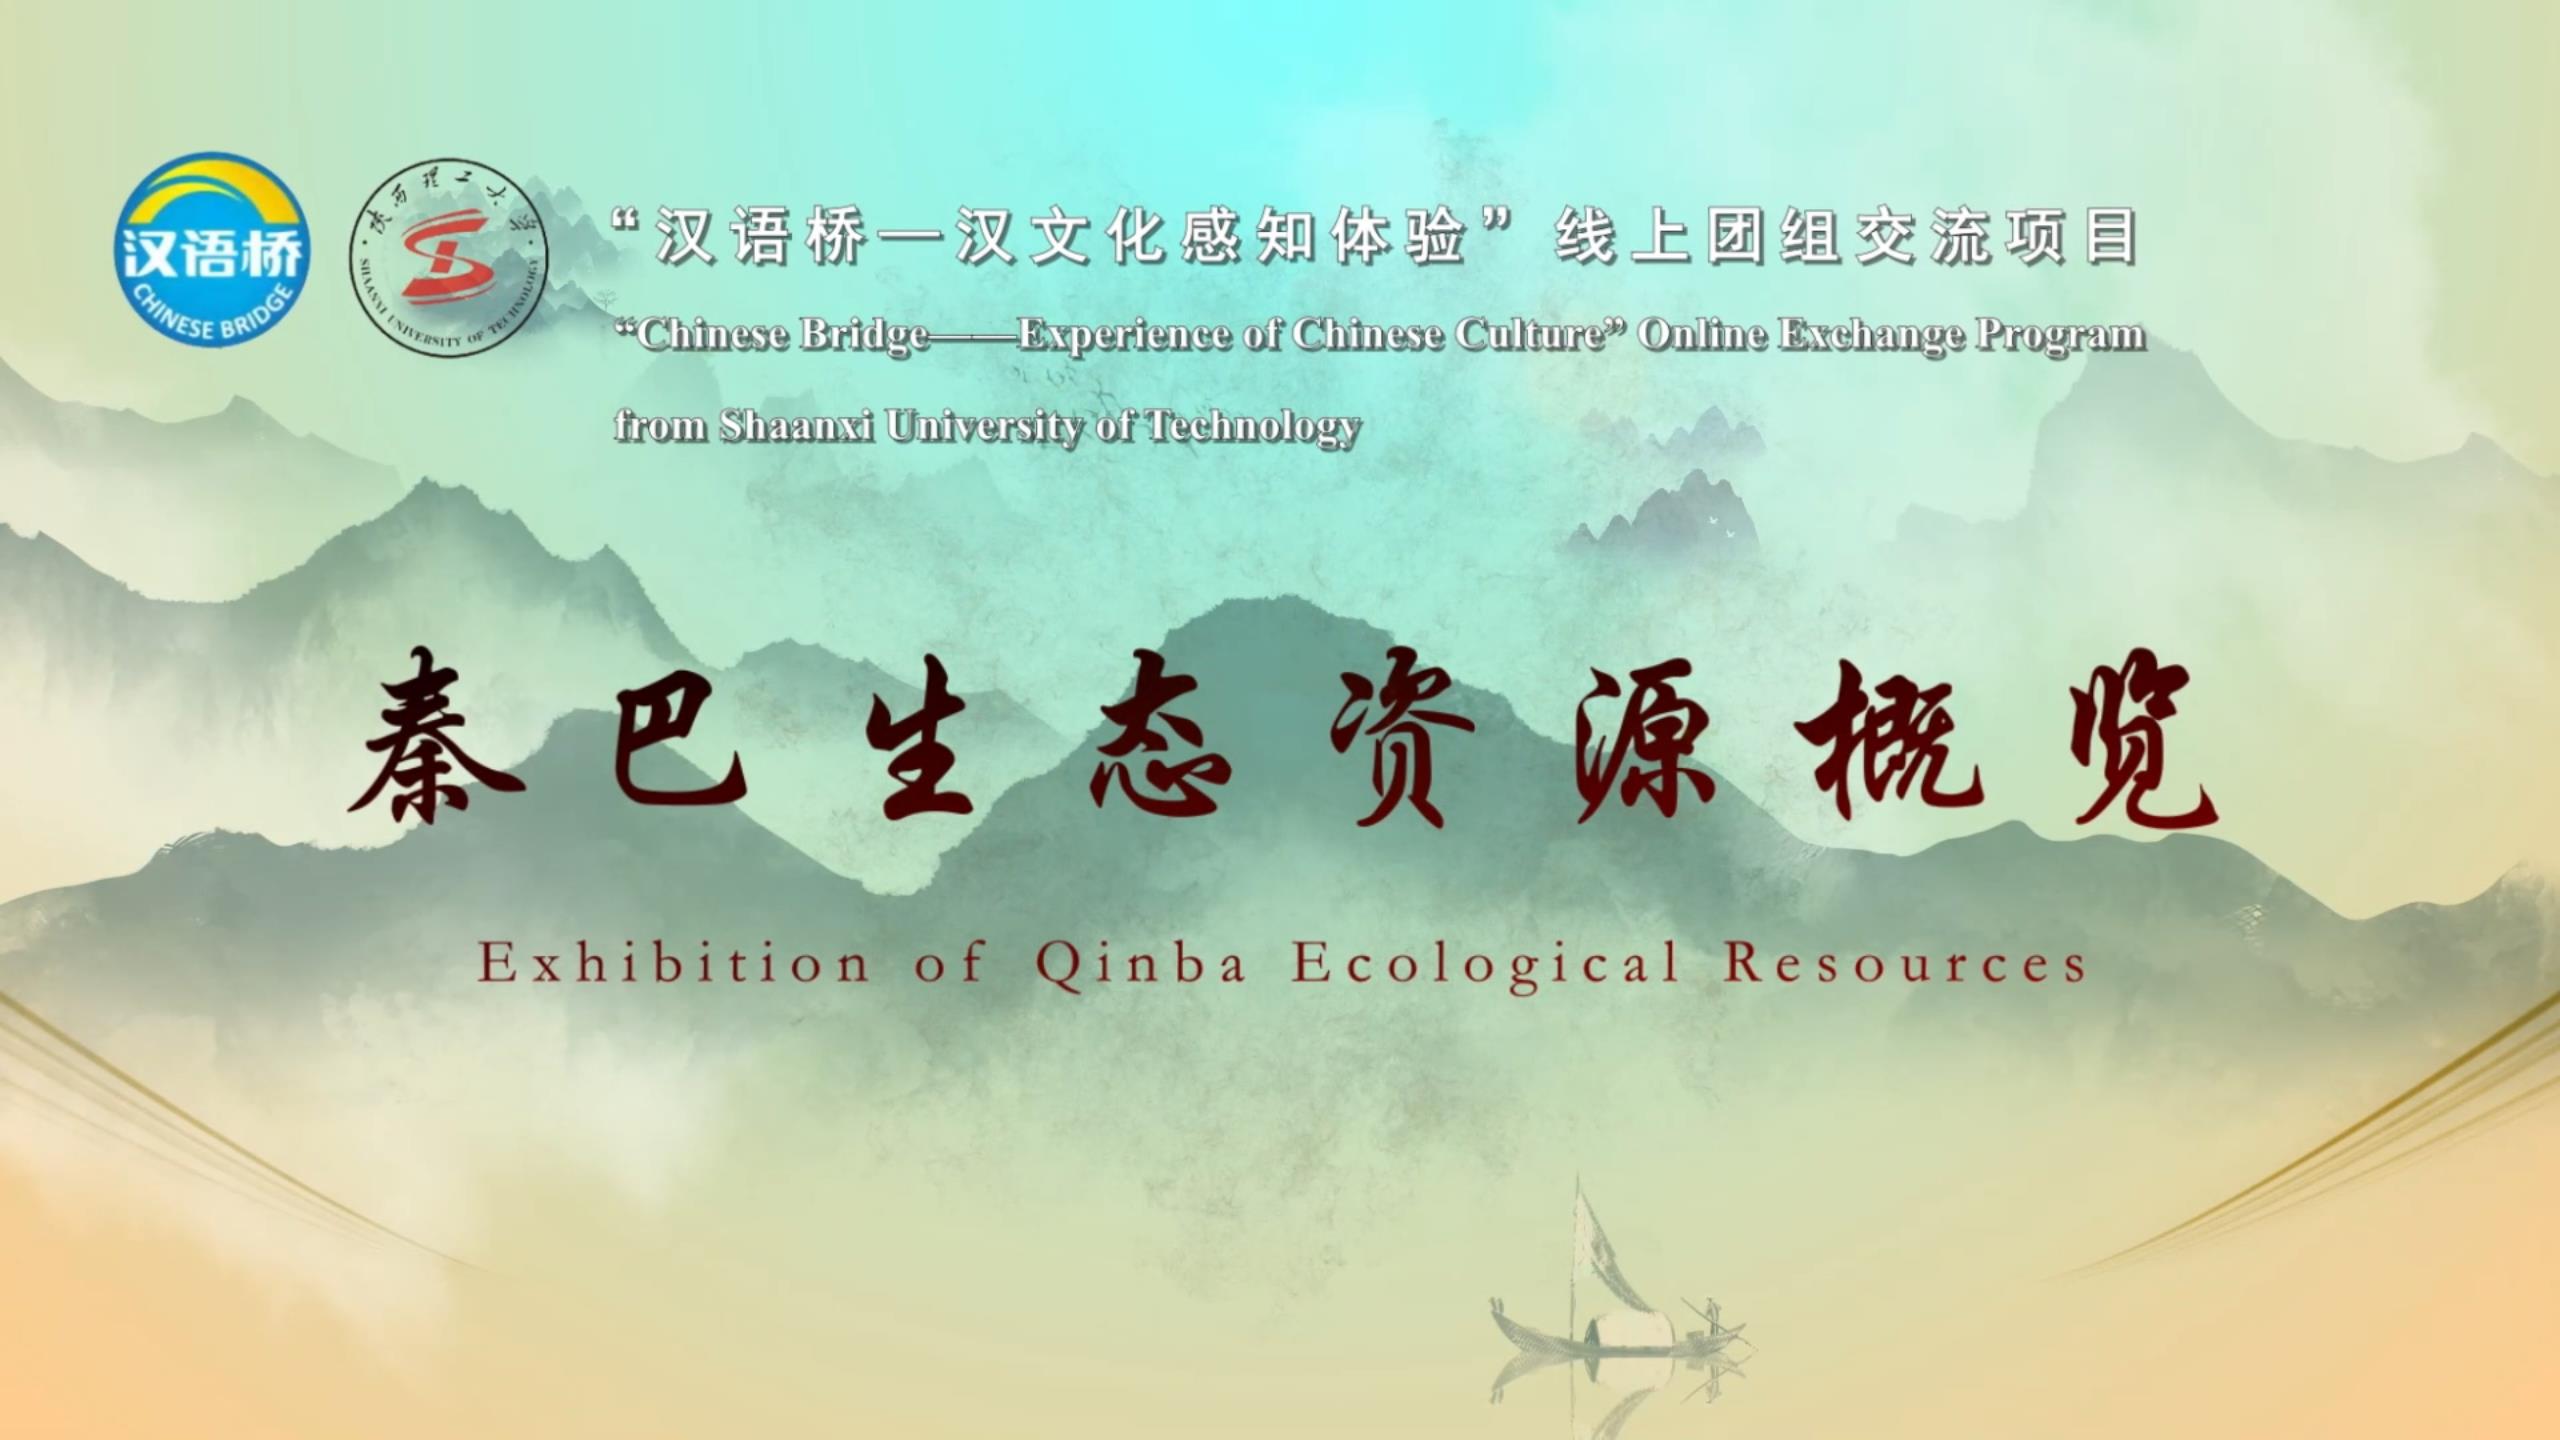 Exhibition of Qinba Ecological Resources